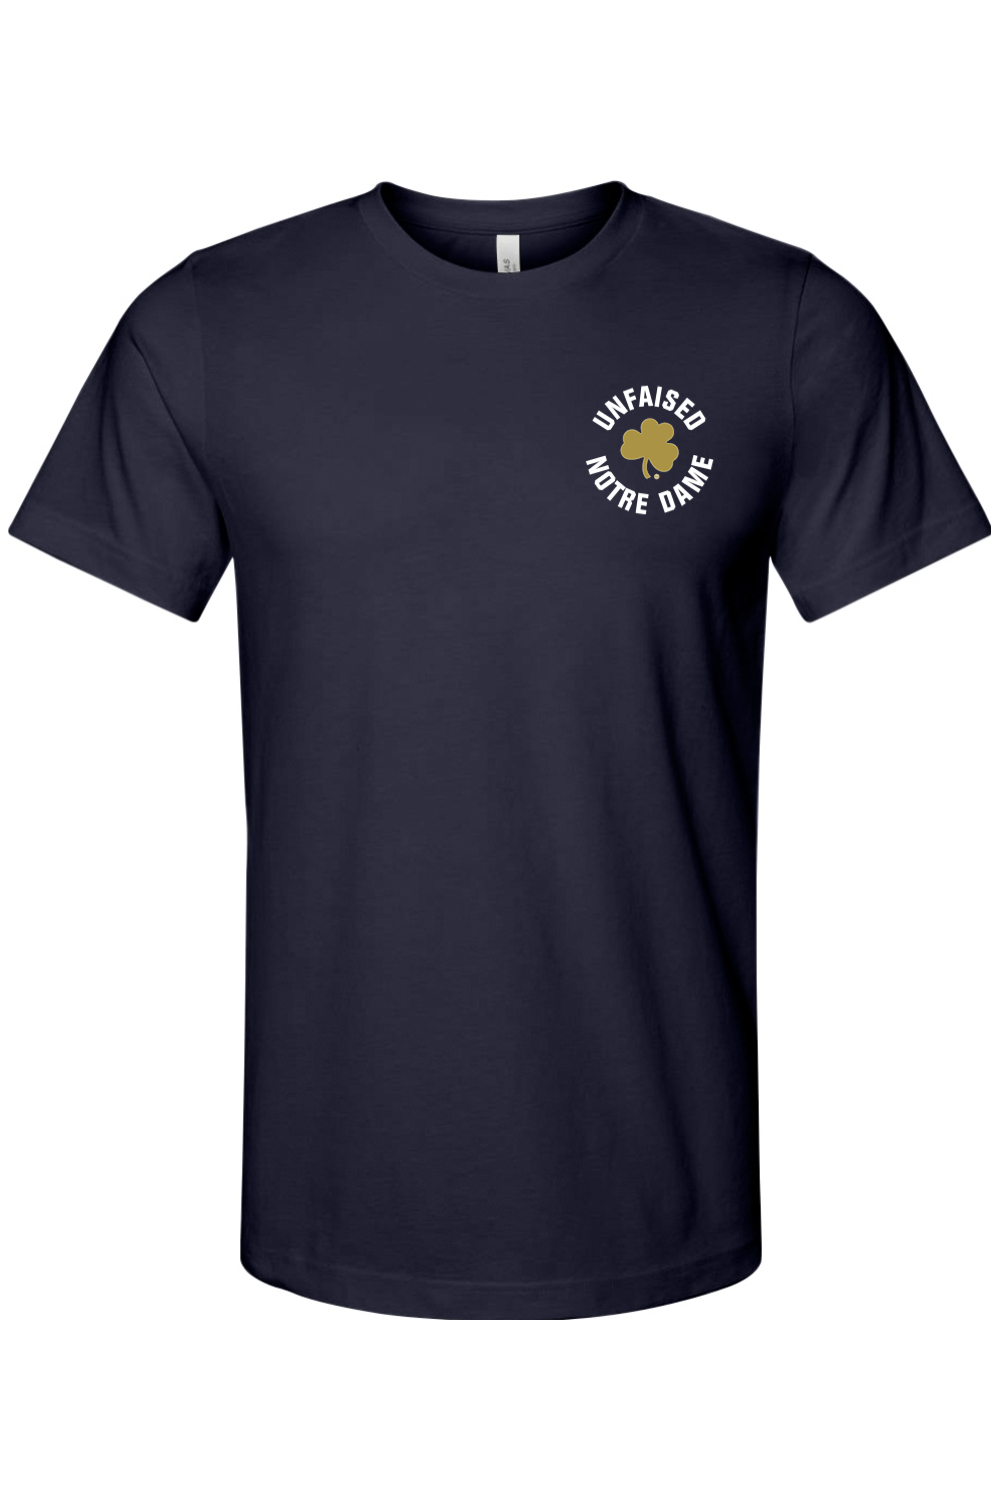 Unfaised Navy T-Shirt Generic Shersey